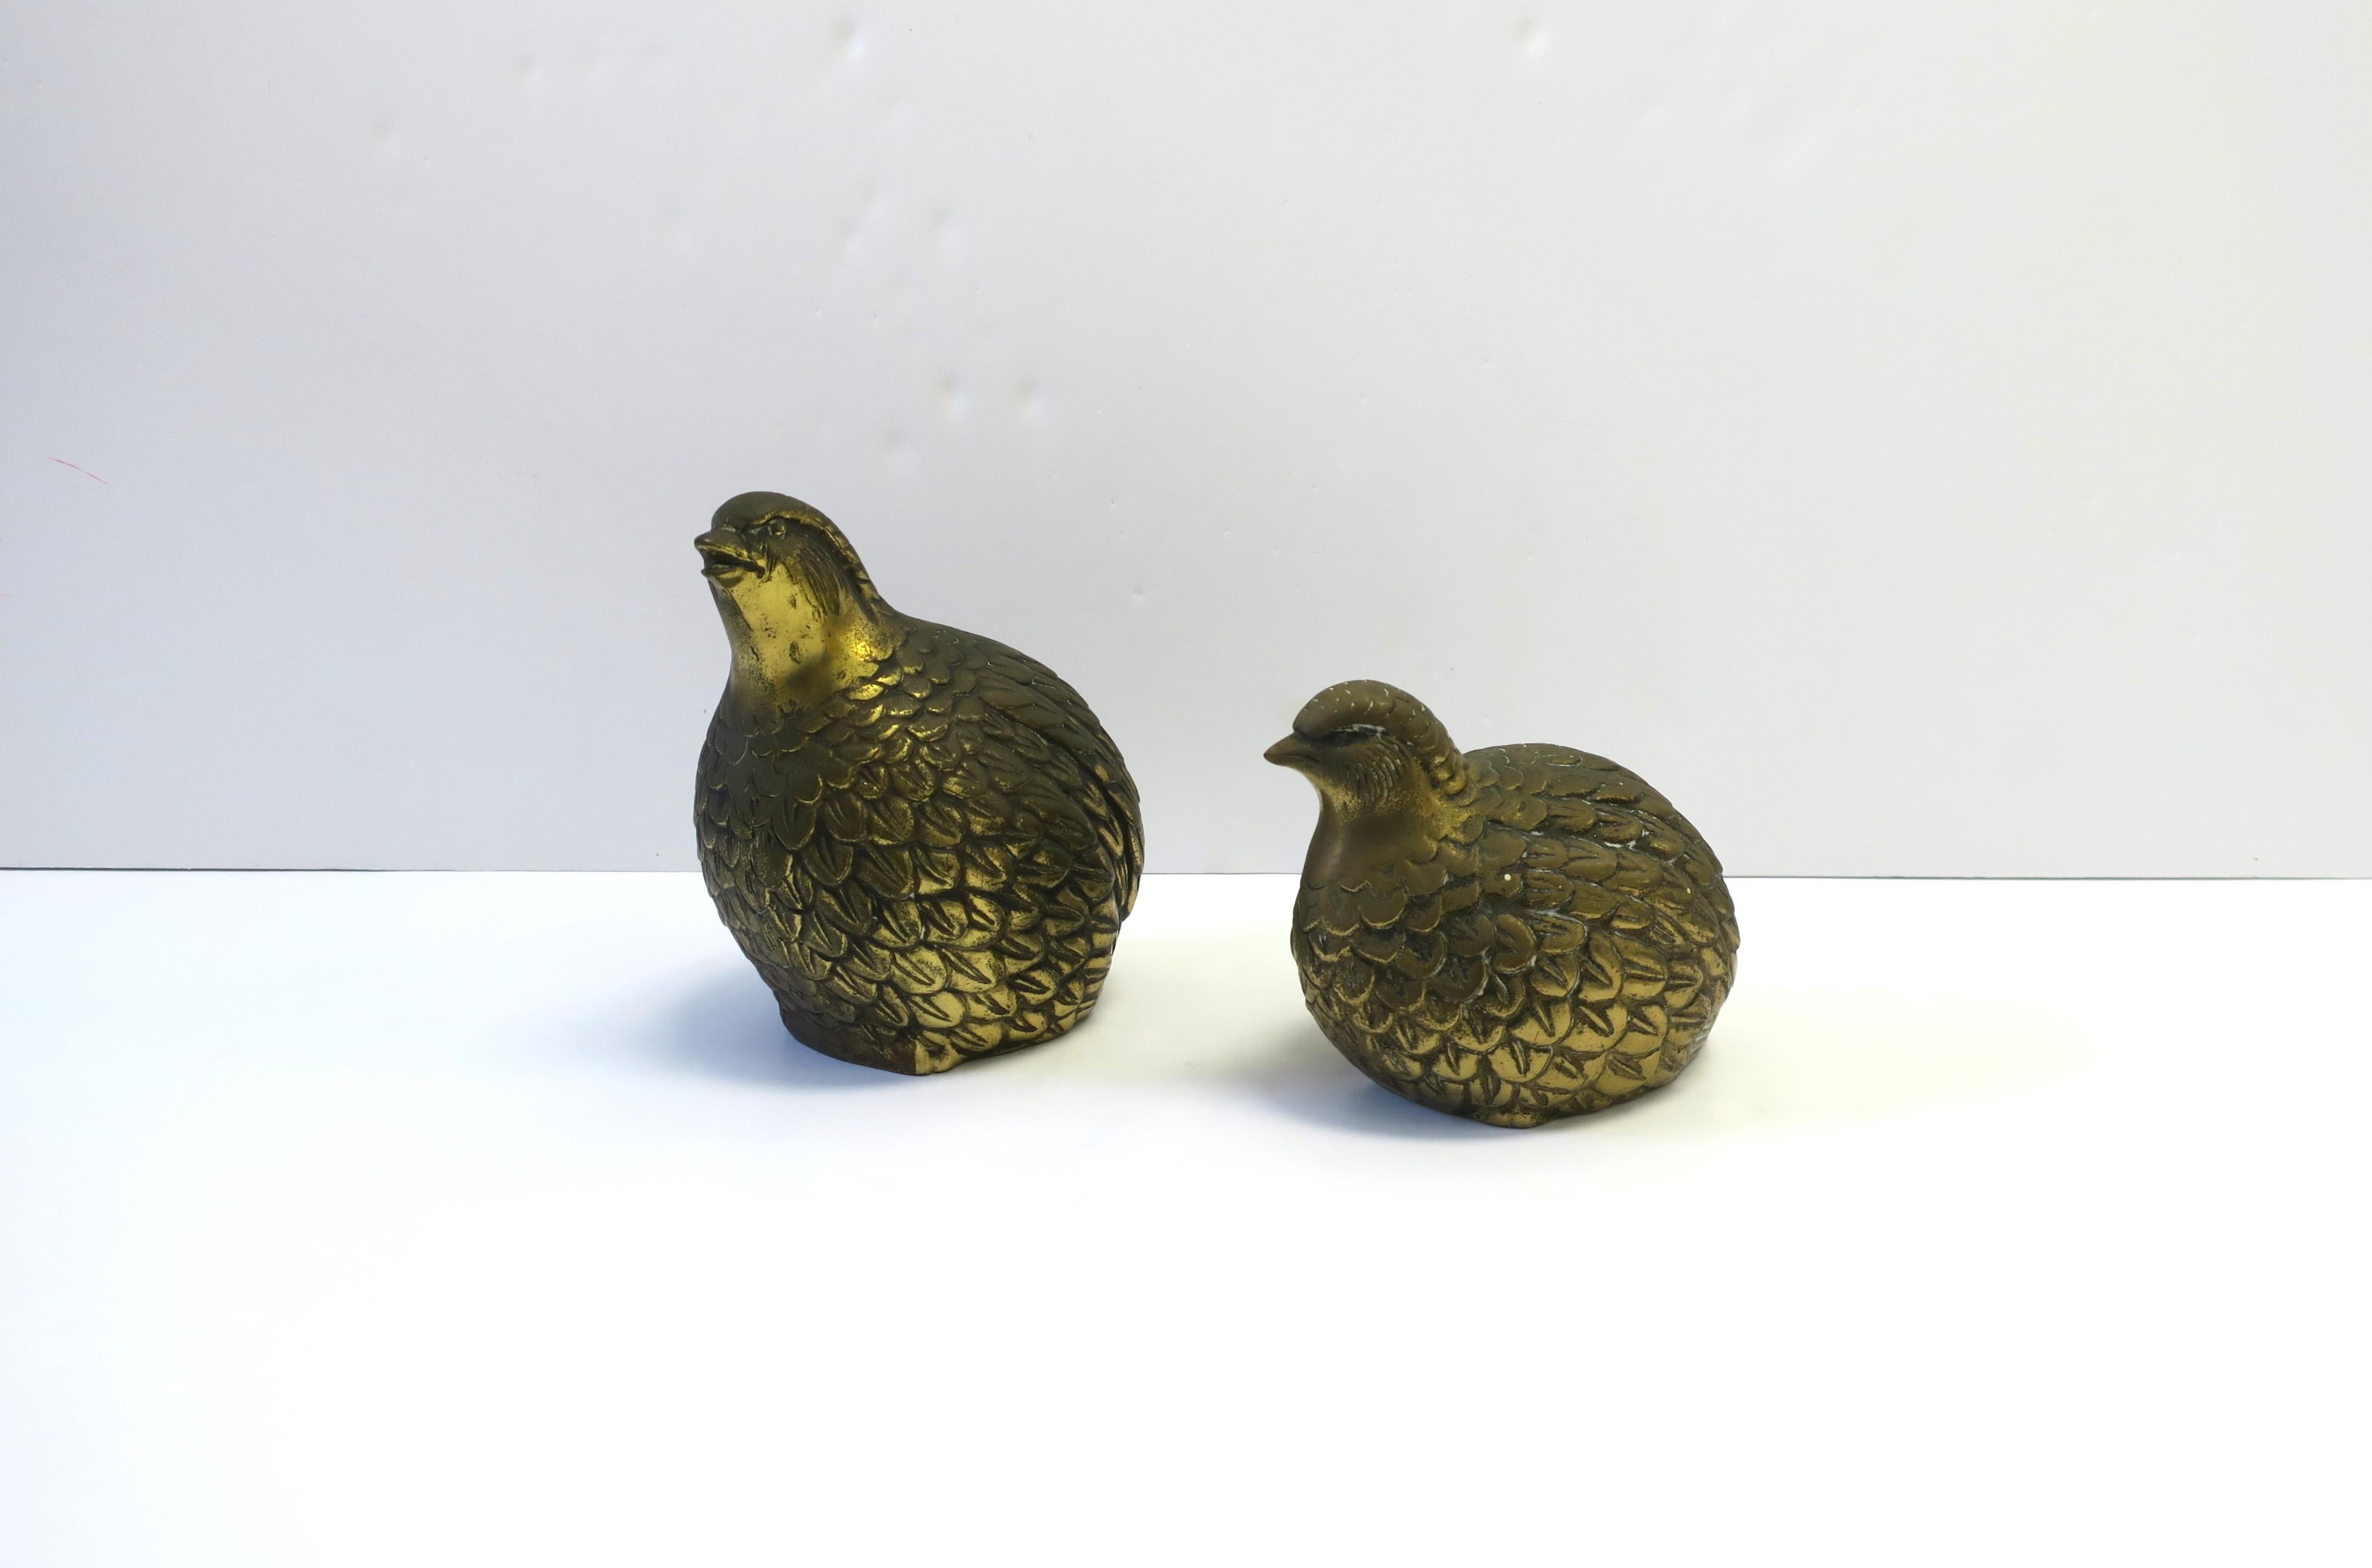 A vintage set of brass-plated partridge birds decorative objects or bookends, circa mid-20th century, 1960s. Birds are substantial and have detailed feathers around their body. Birds are in the style of Gucci Home collection (Gucci made similar mid